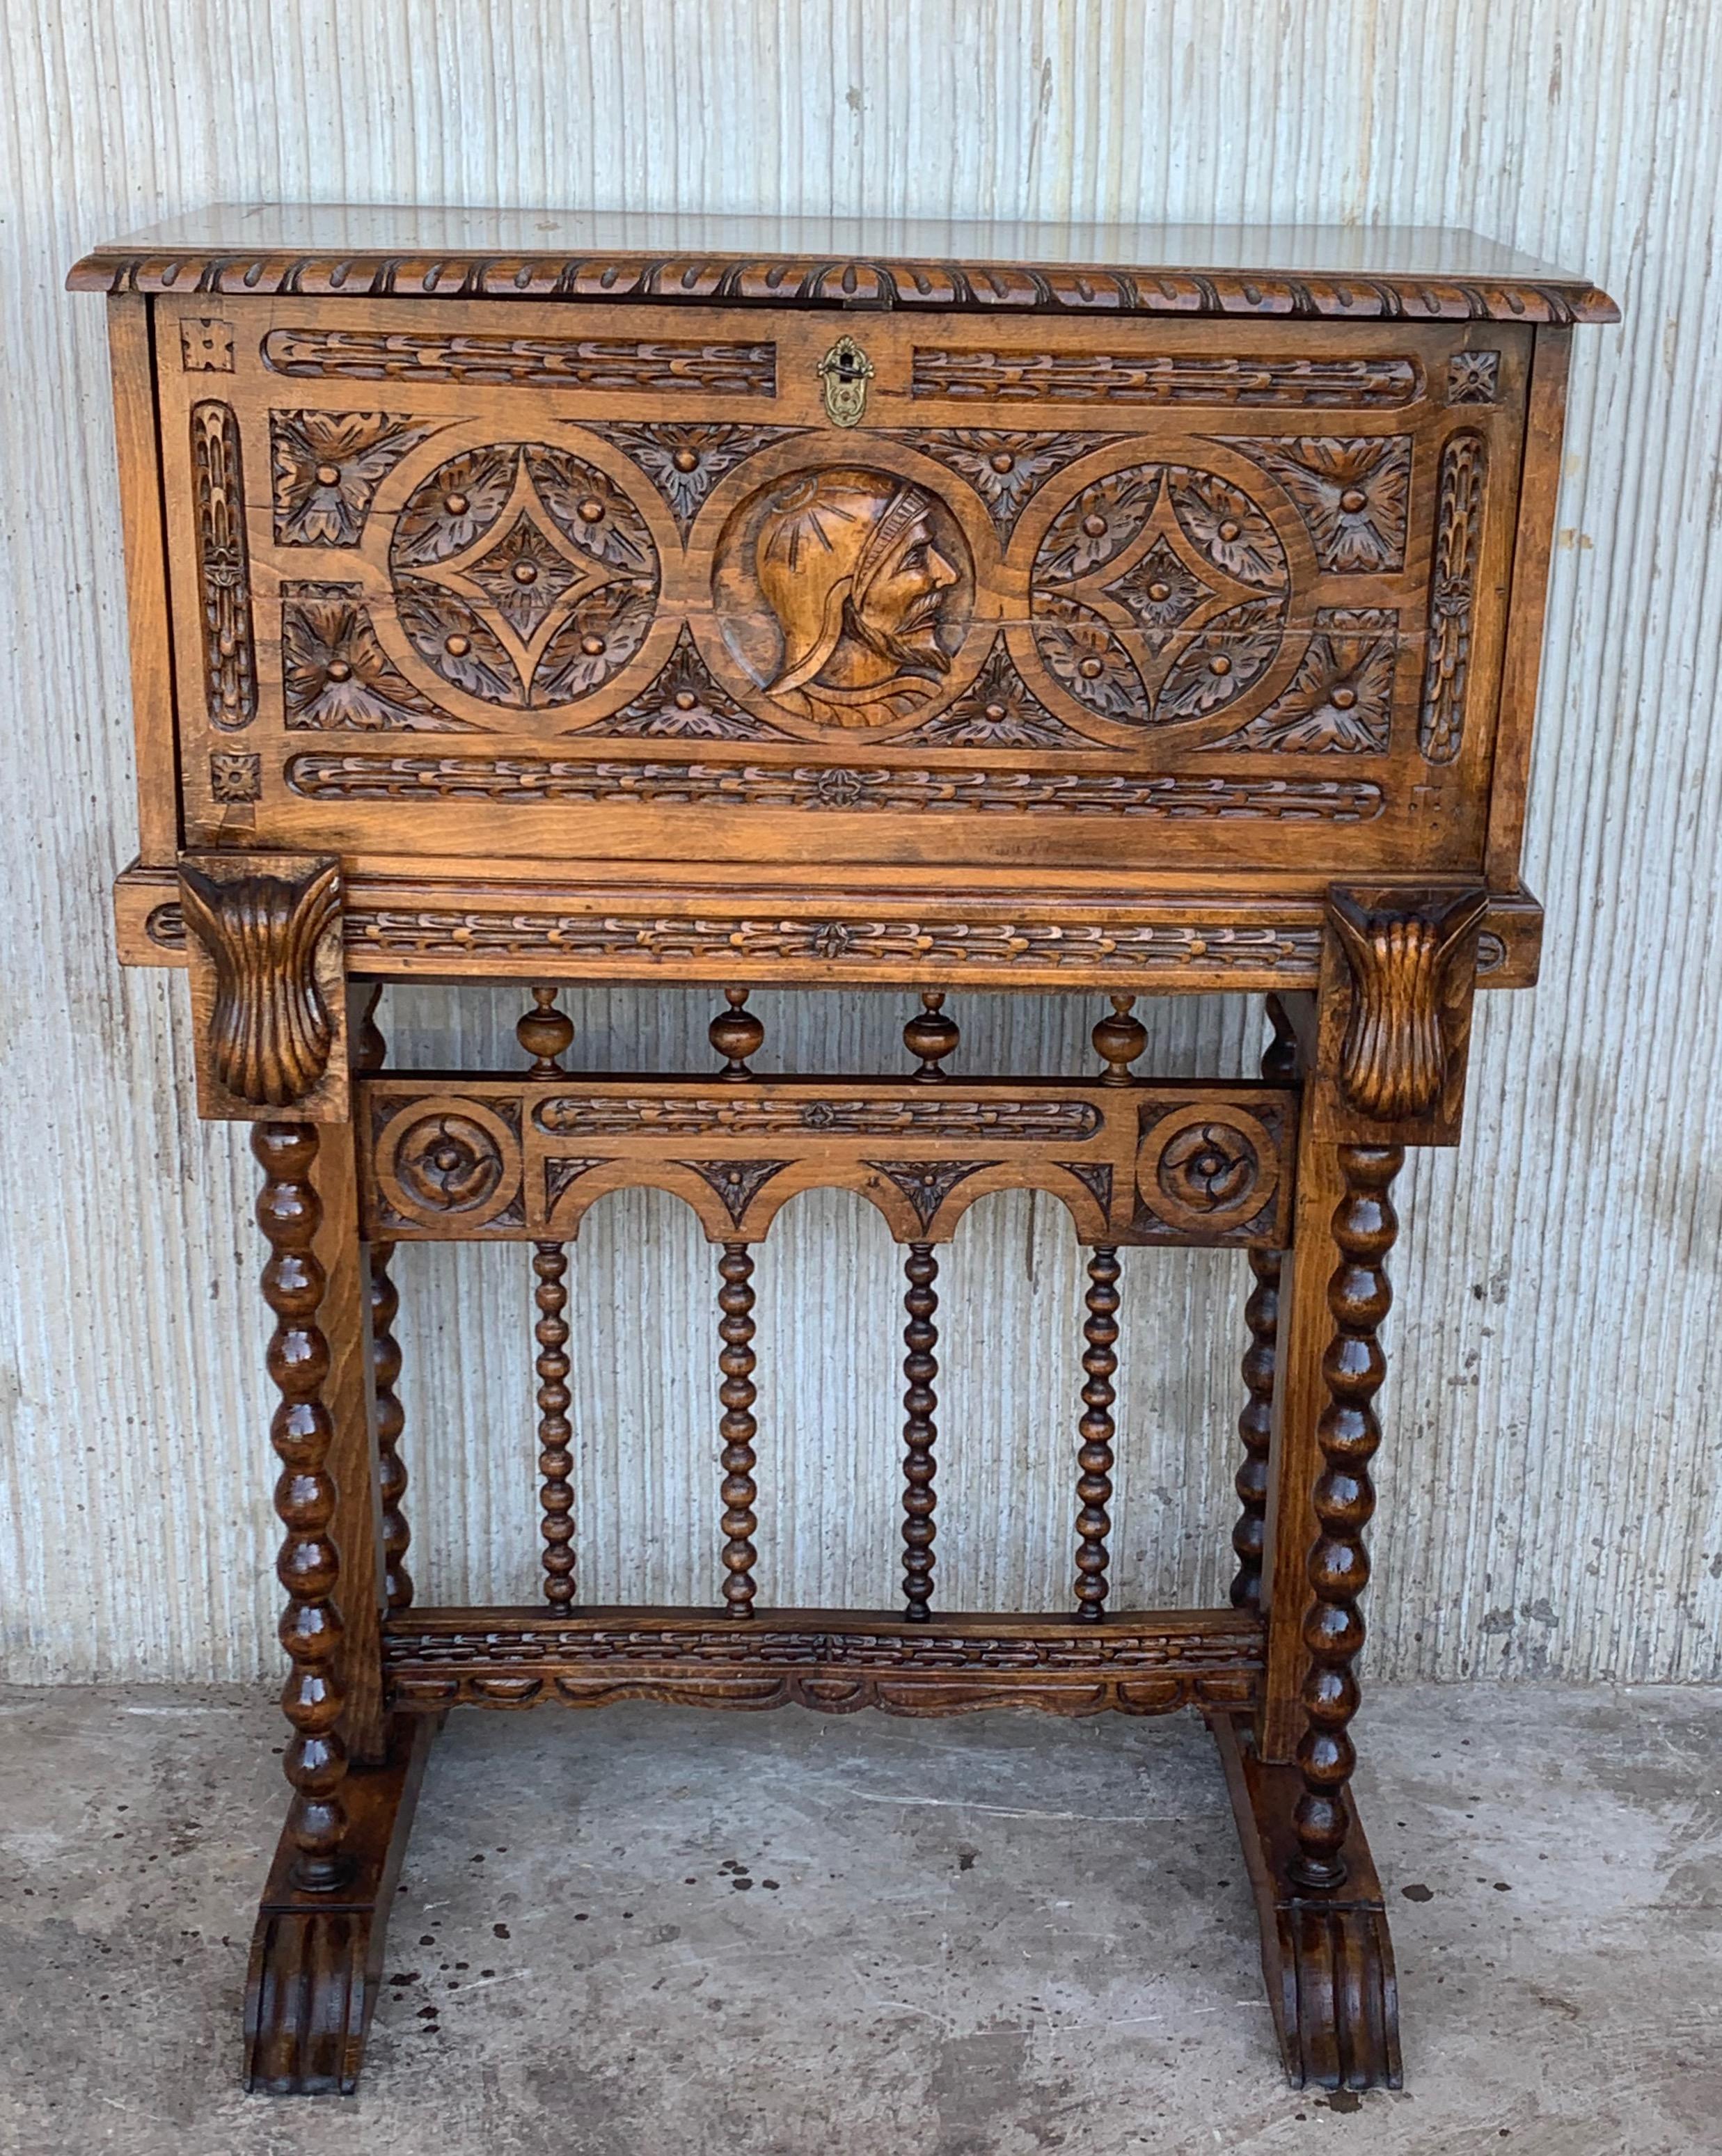 This Bargueno is embellished with a carving head of Don Quixote de la Mancha bordered with branches of leaves. The desk is supported by a pedestal joined by a bridge of turned columns. The front legs contain a carving of two wind god heads with an